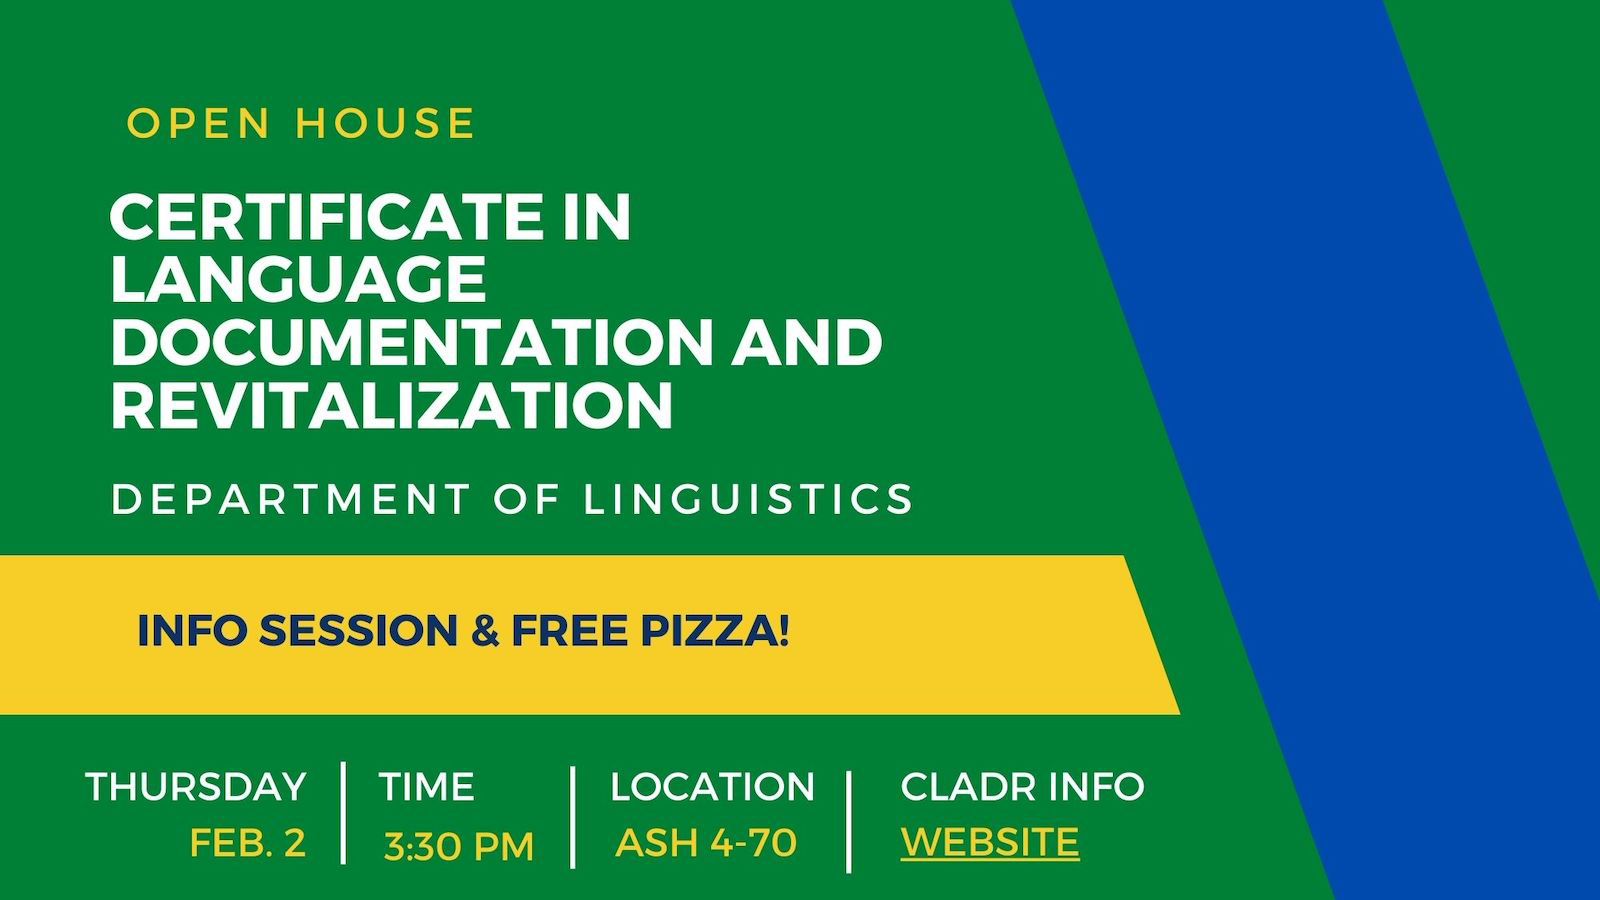 Open House: Certificate in Language Documentation and Revitalization